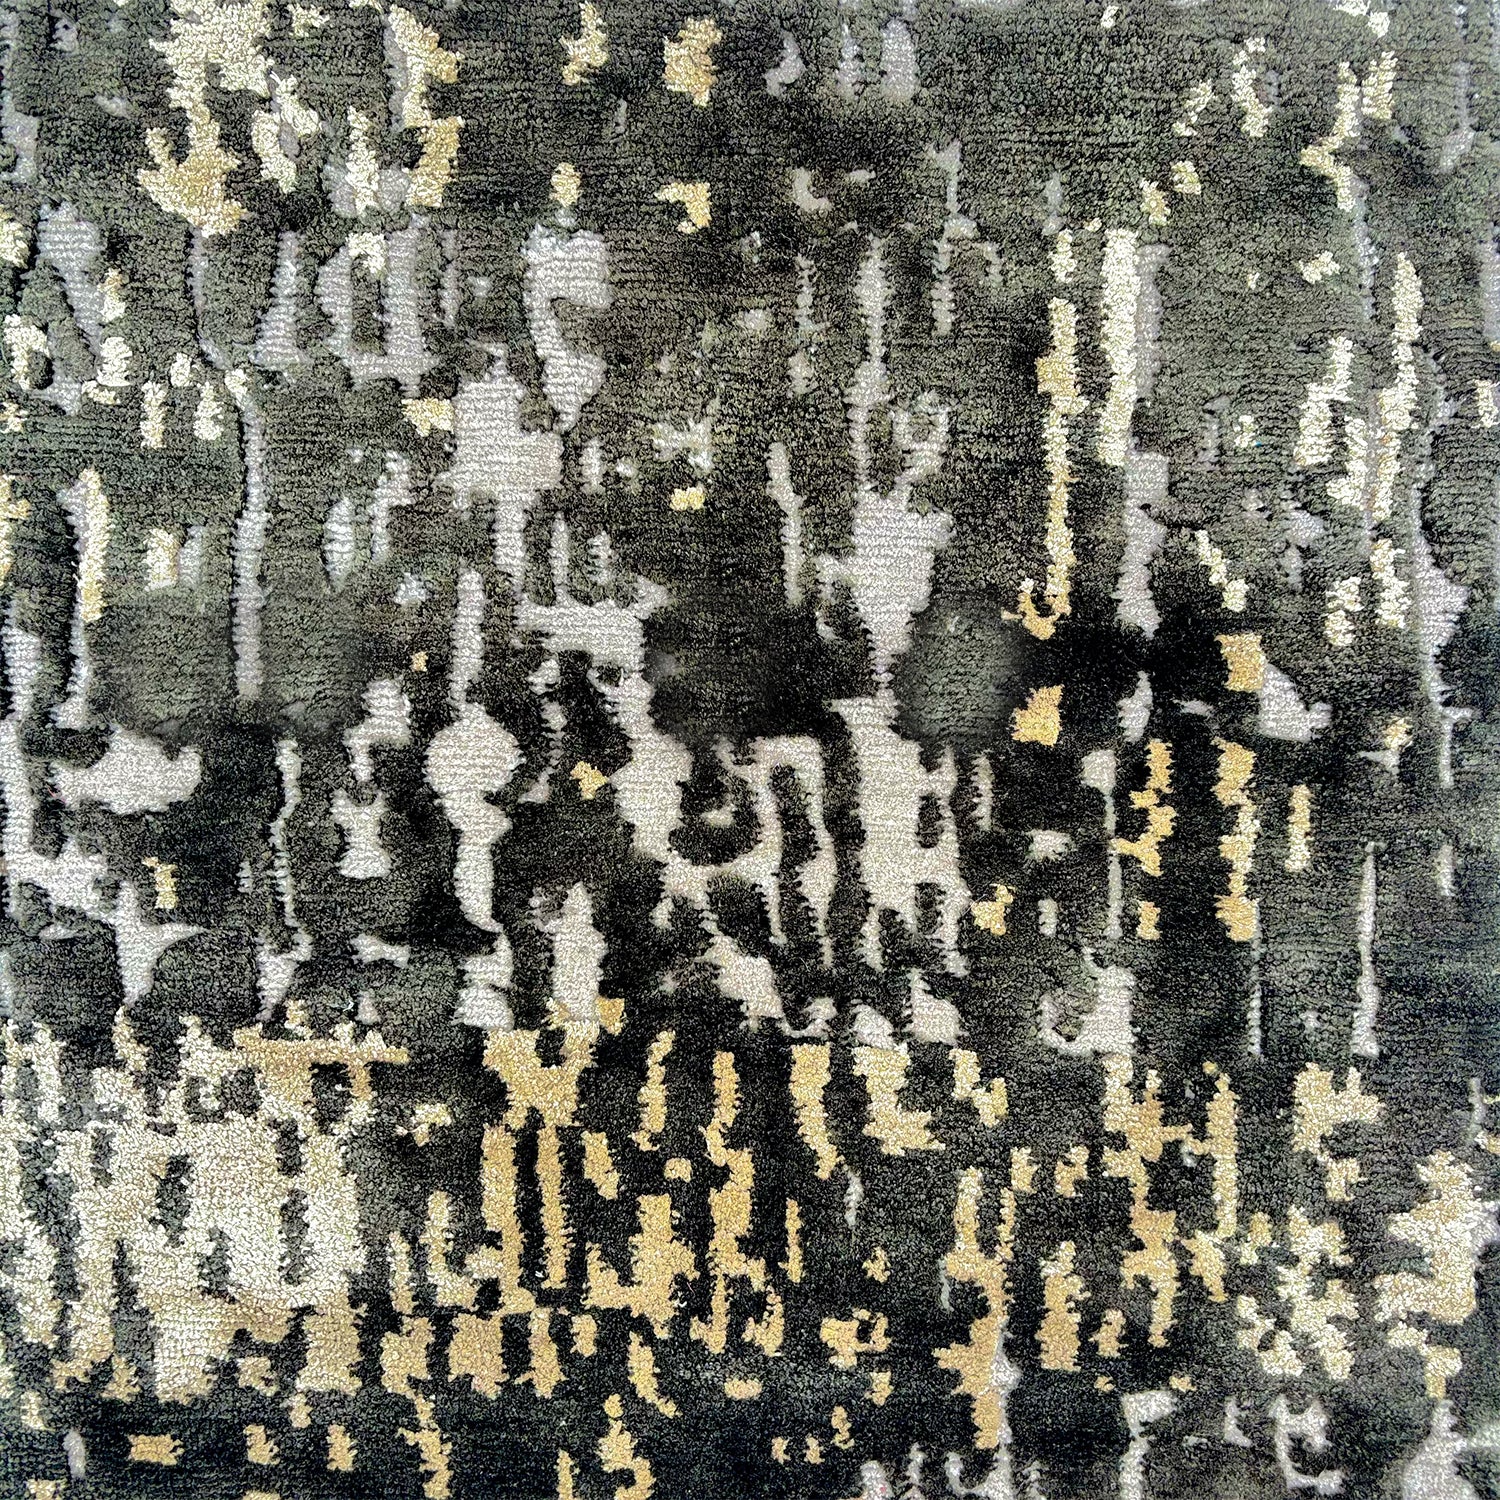 Detail of a silk rug in black, cream and charcoal in an abstract textural pattern.